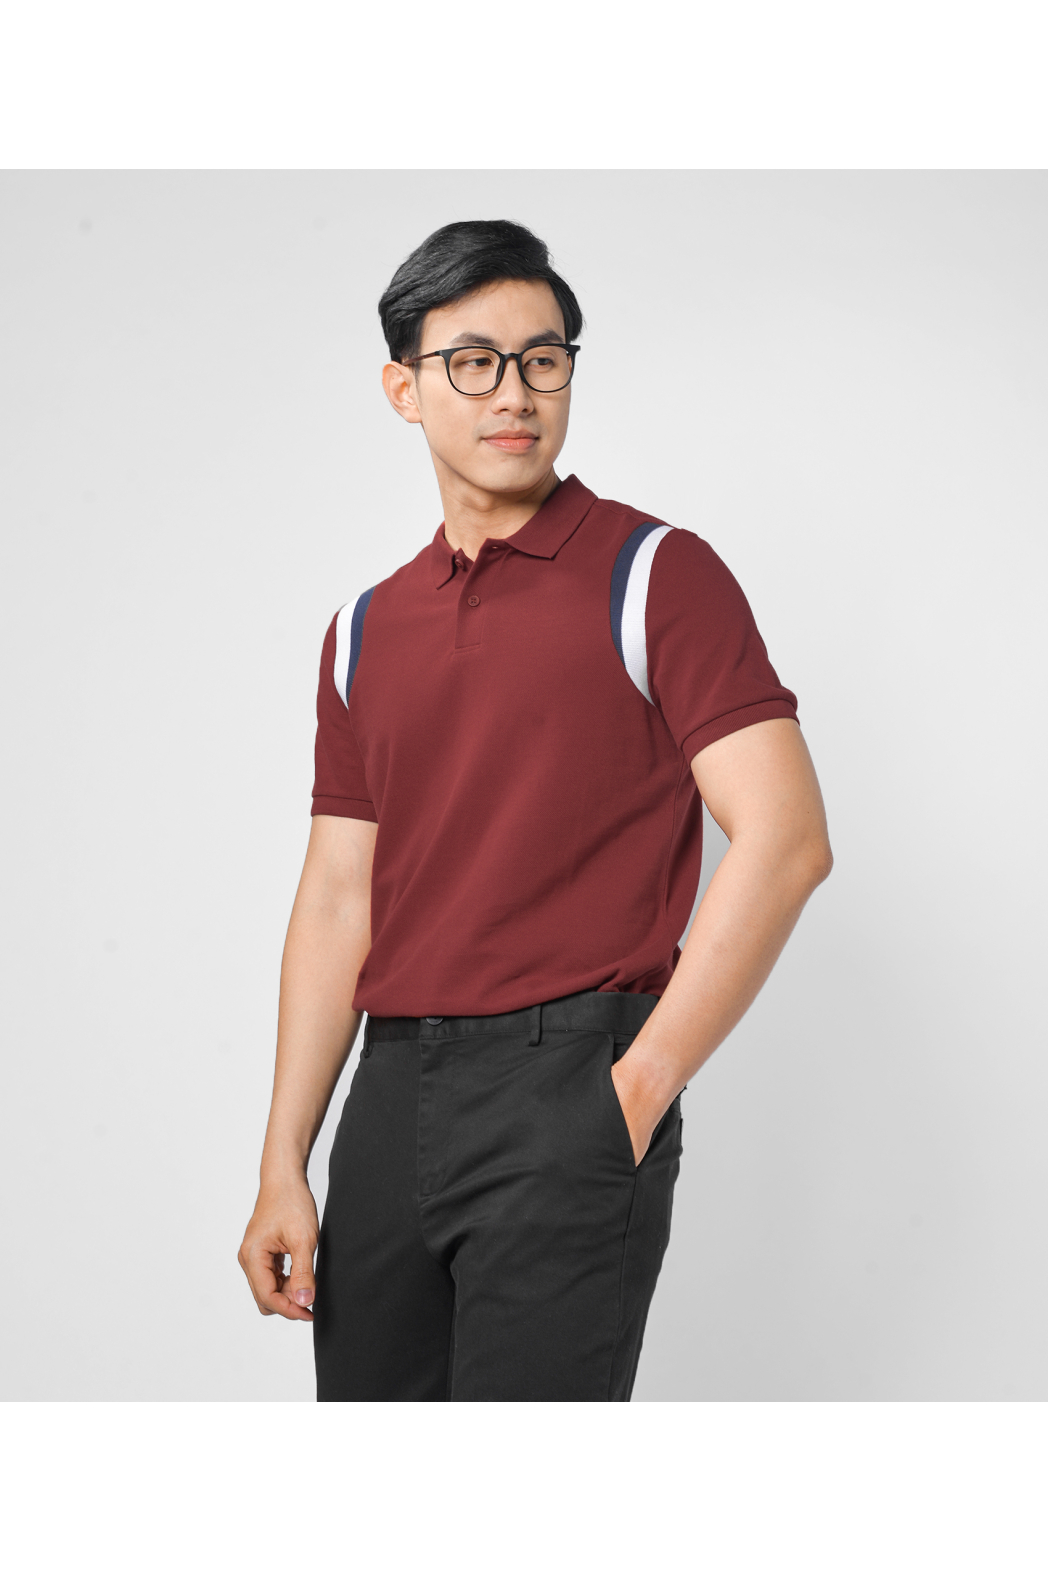 ao-polo-contrast-with-rib-fitted-form-10f20pol003